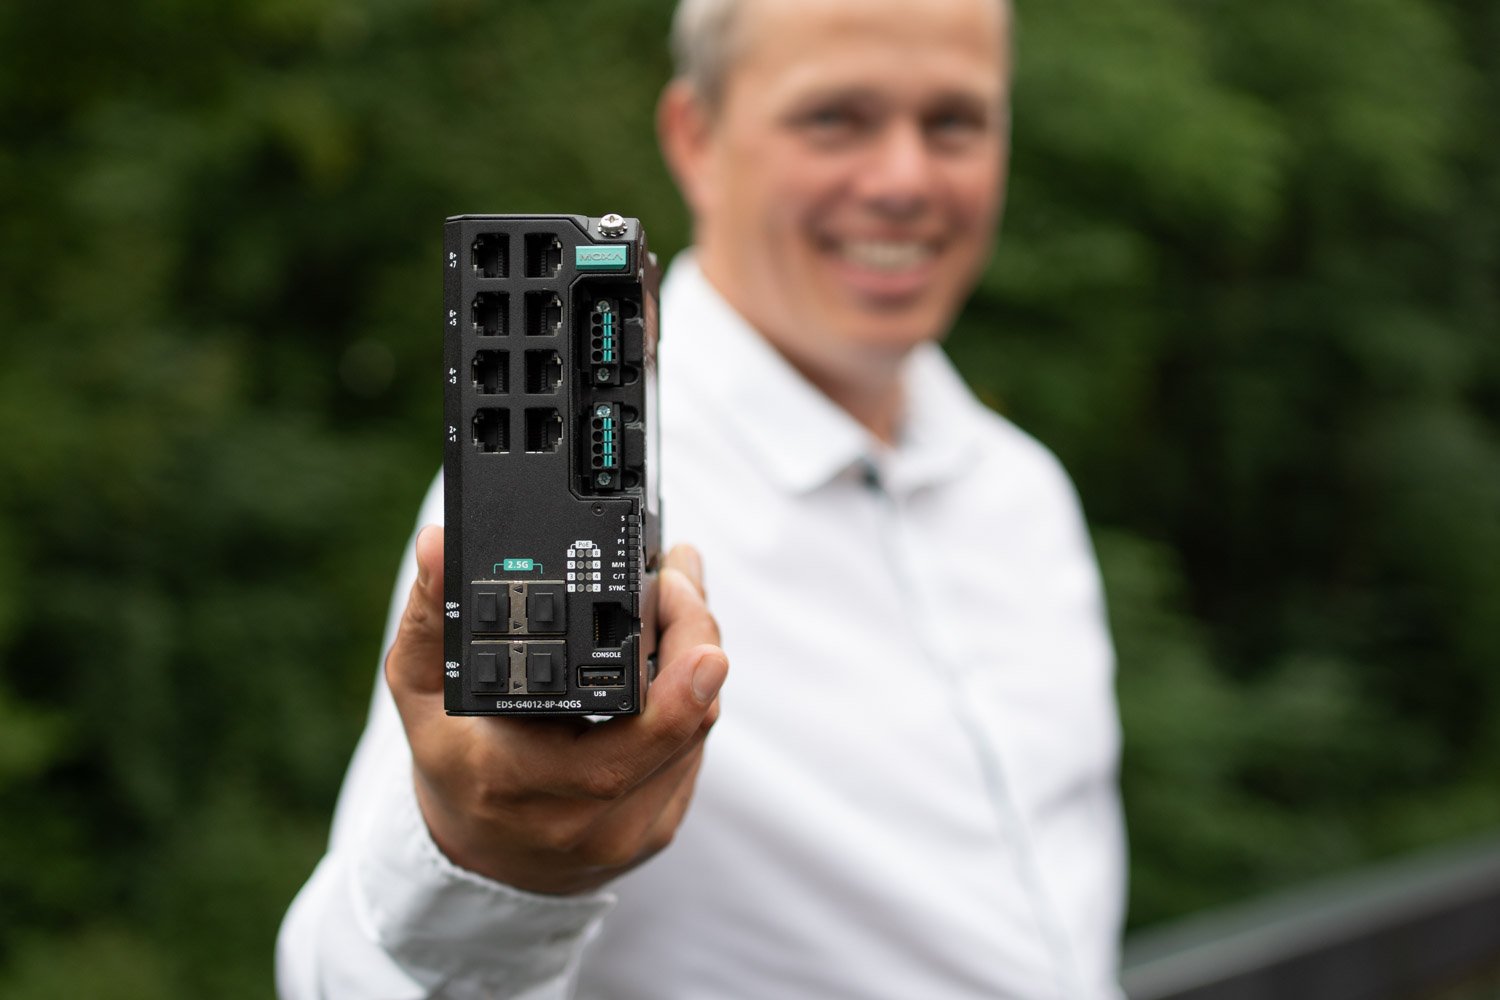 Mr. Gøran Labrå, Sales director at Hatteland Technology, is holding a Moxa EDS-4000 unit, showing it to the camera. He is smiling, wearing a white shirt. There are green trees in the background.